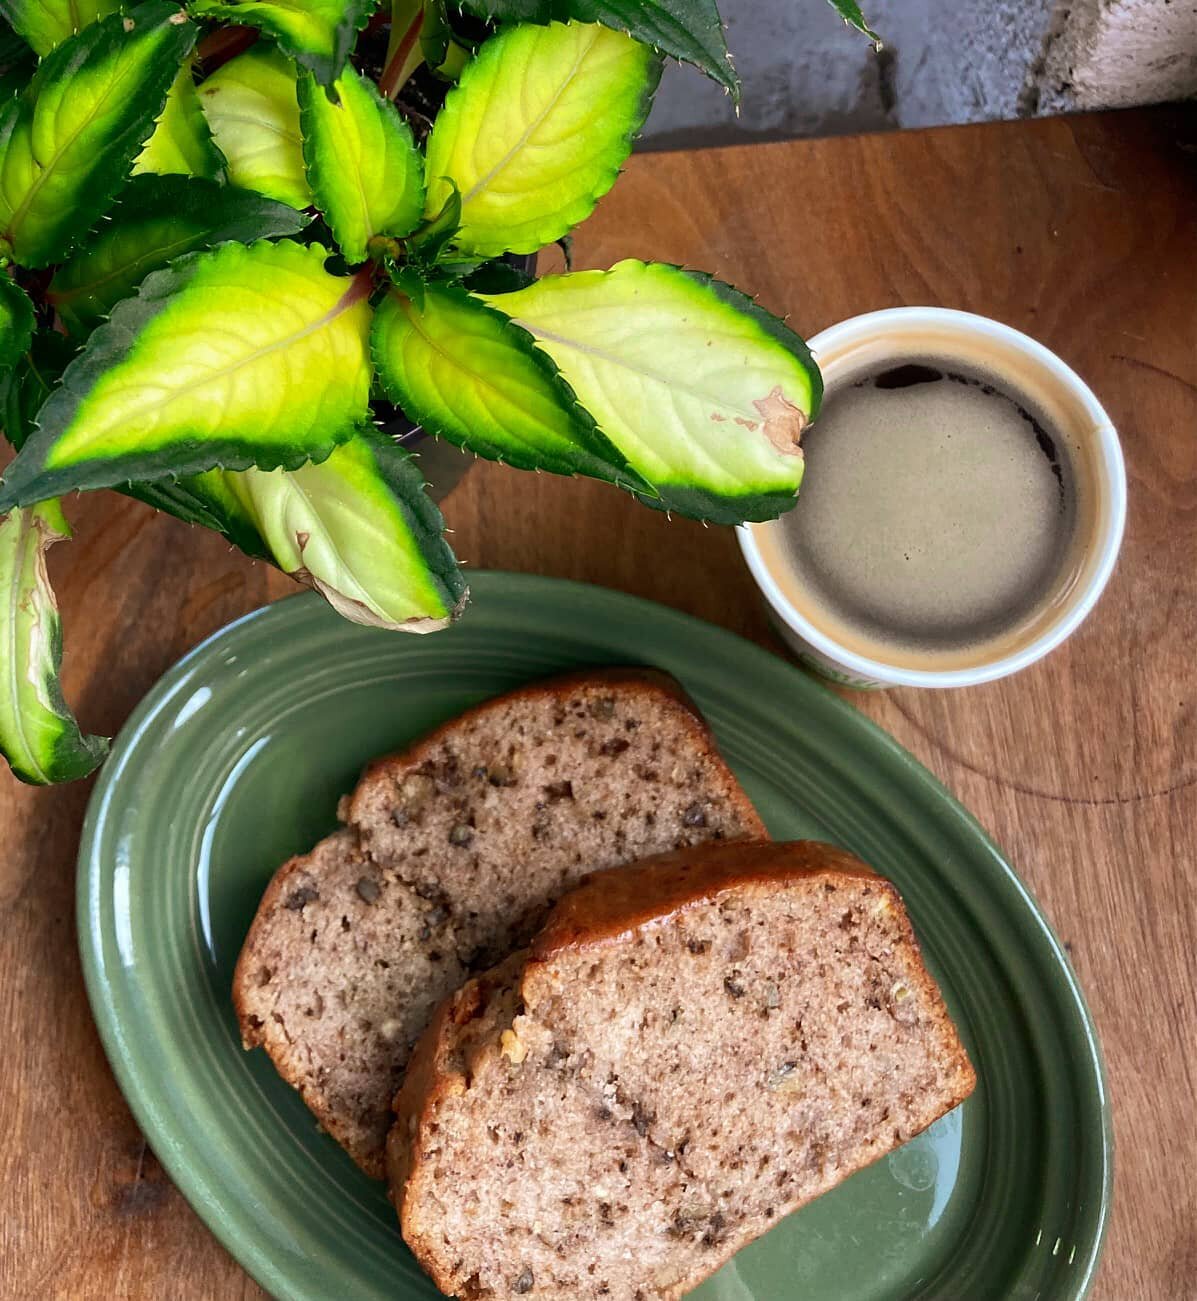 Come grab a slice of this delicious vegan banana bread from @deliedison to enjoy alongside your handcrafted espresso drink ☕

Open 8am - 2pm today!